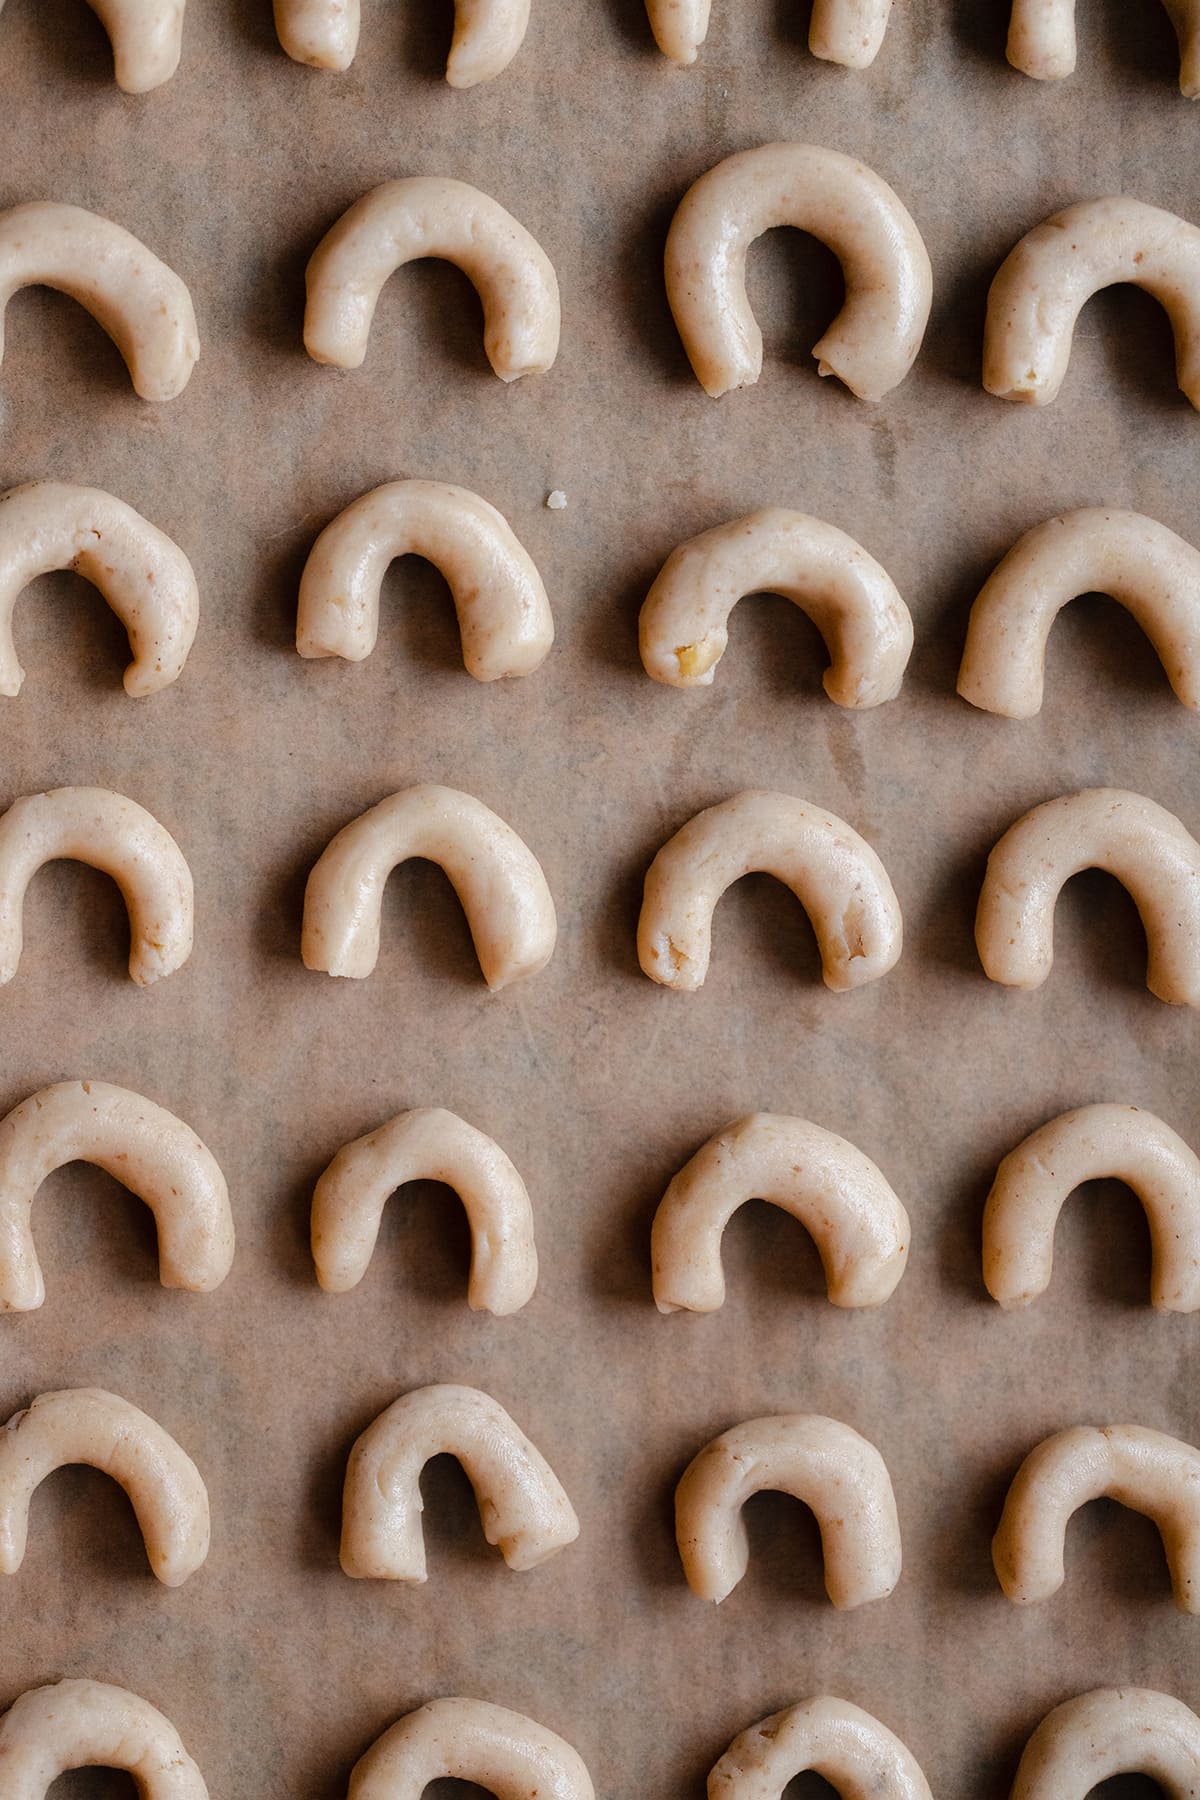 Crescent cookies shaped before baking on a baking sheet lined with baking powder.